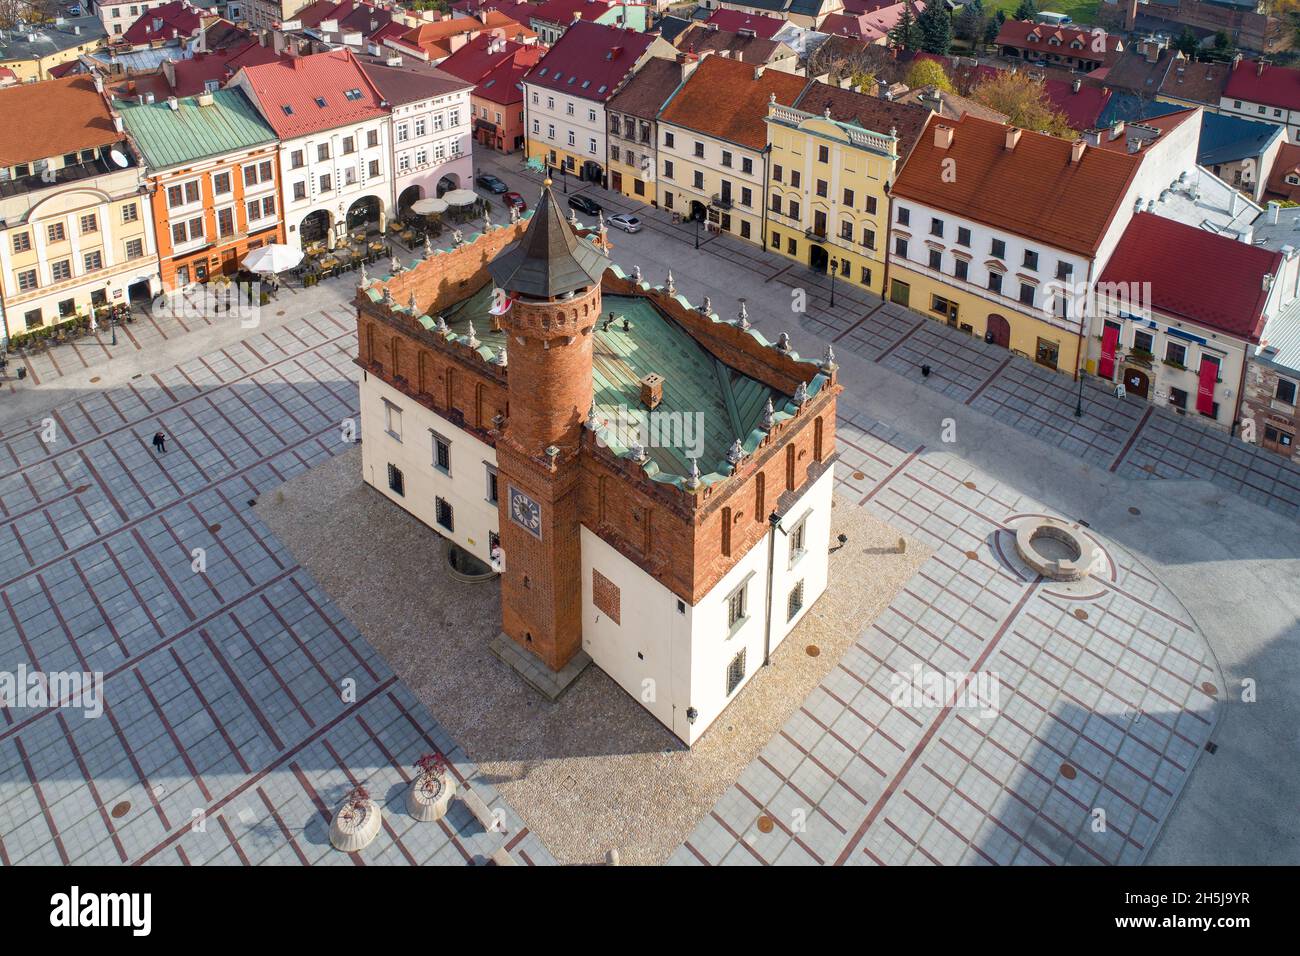 Tarnow, Poland. Town hall with an attic typical for Polish Renaissance. Aerial view from above with old town main square Stock Photo